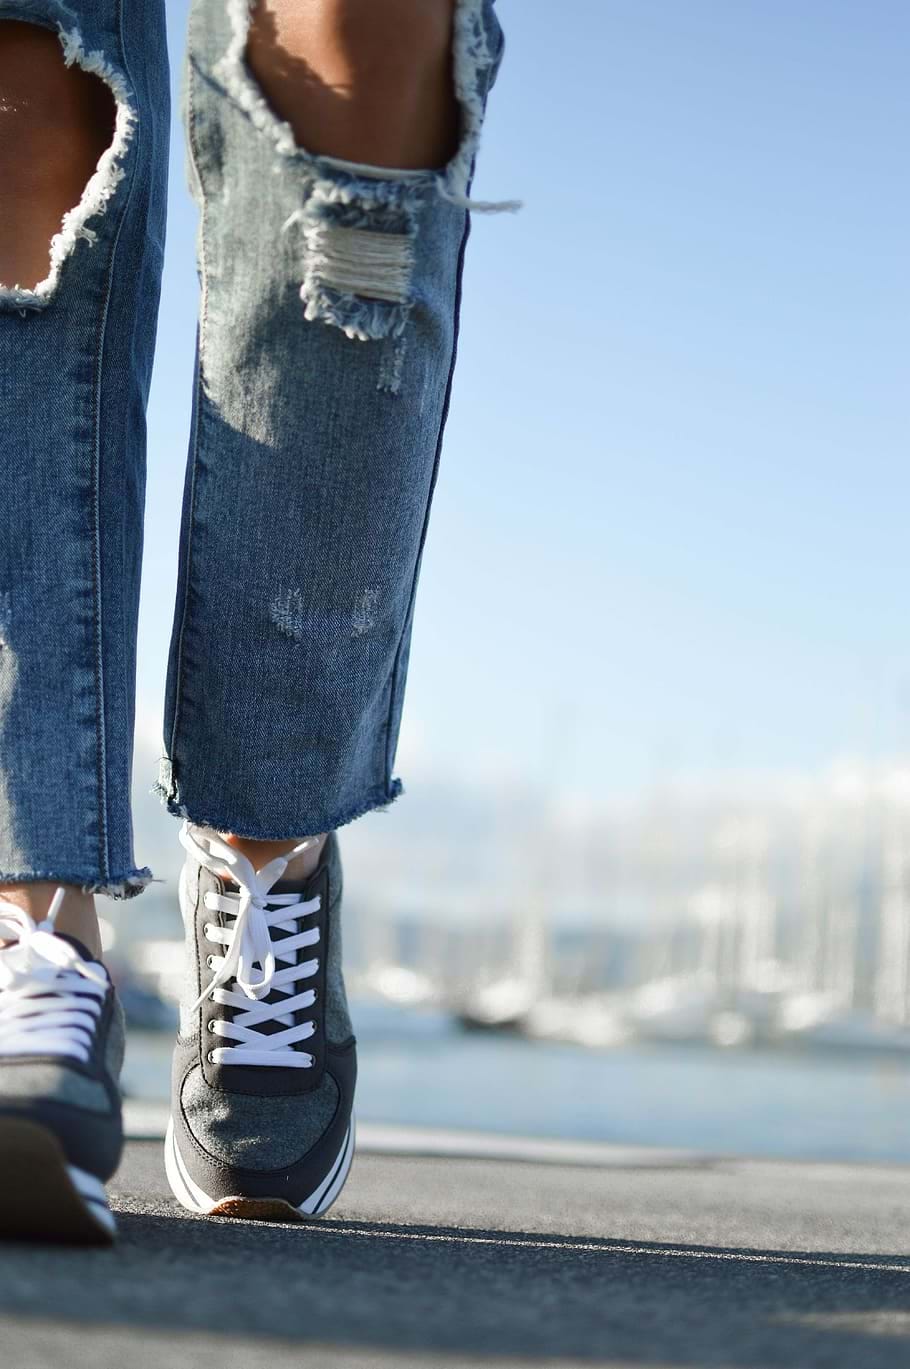 A photograph shows a close up of someone walking in sneakers.